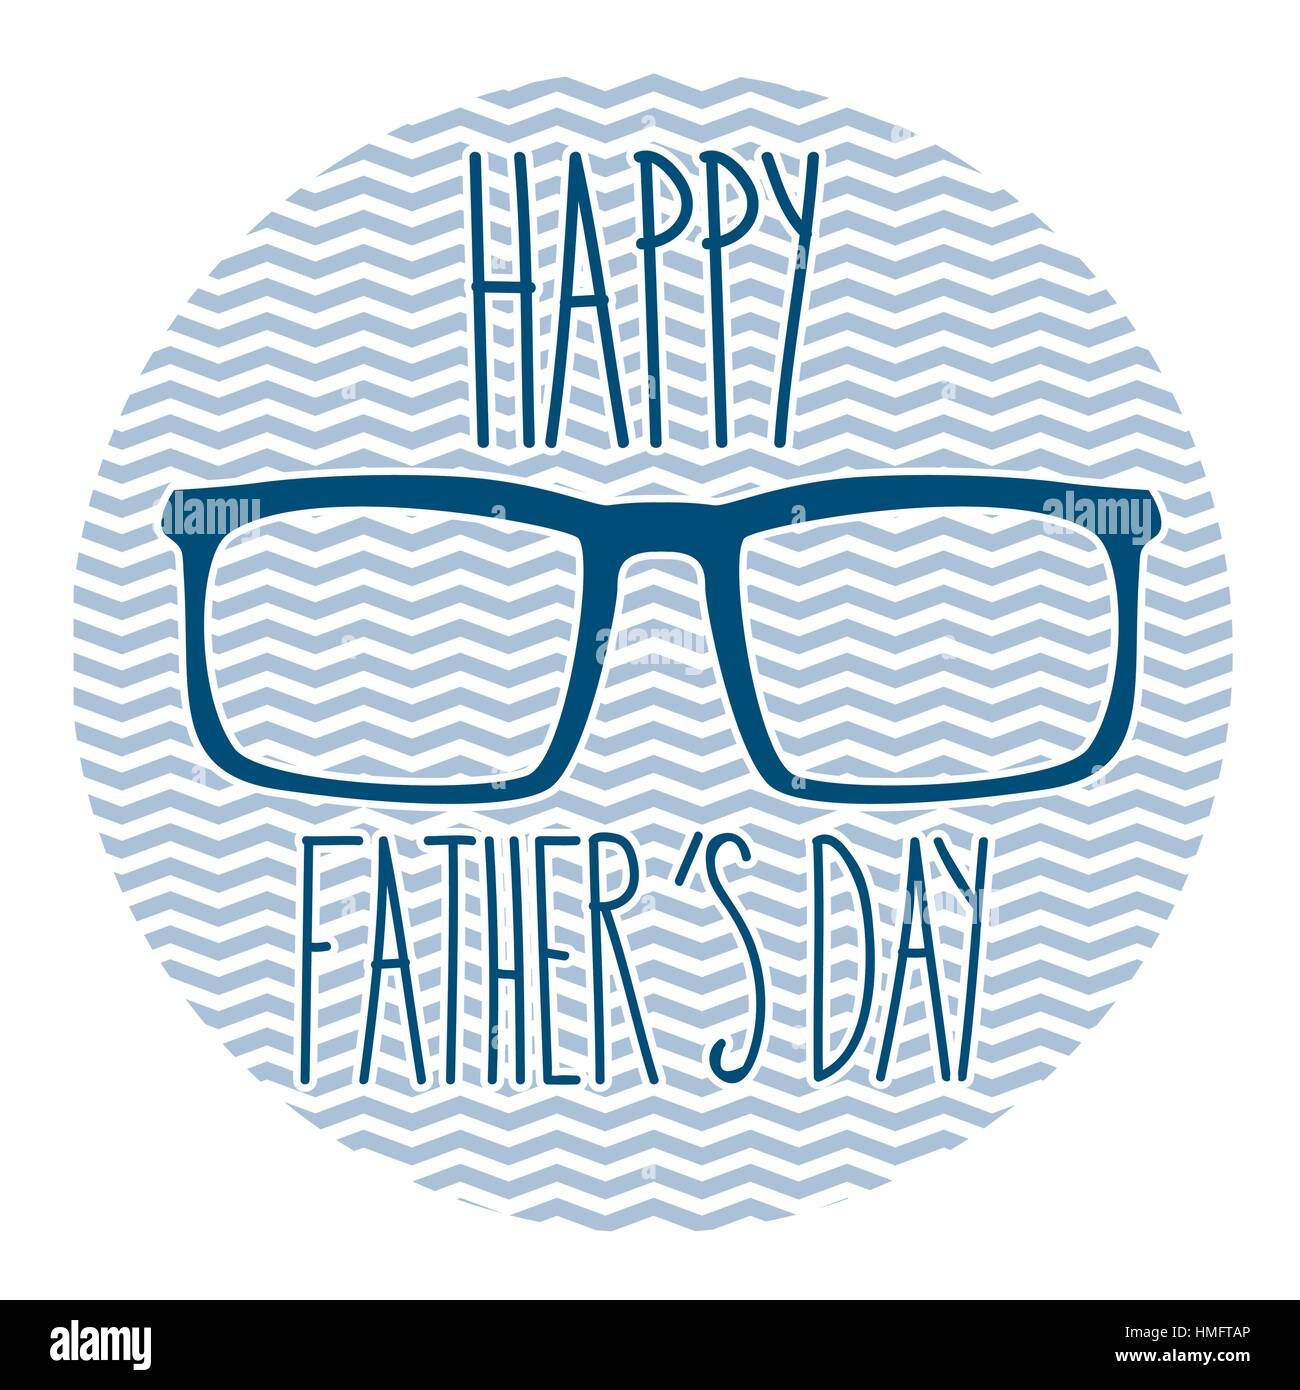 Happy Father's day card full vector elements Stock Vector